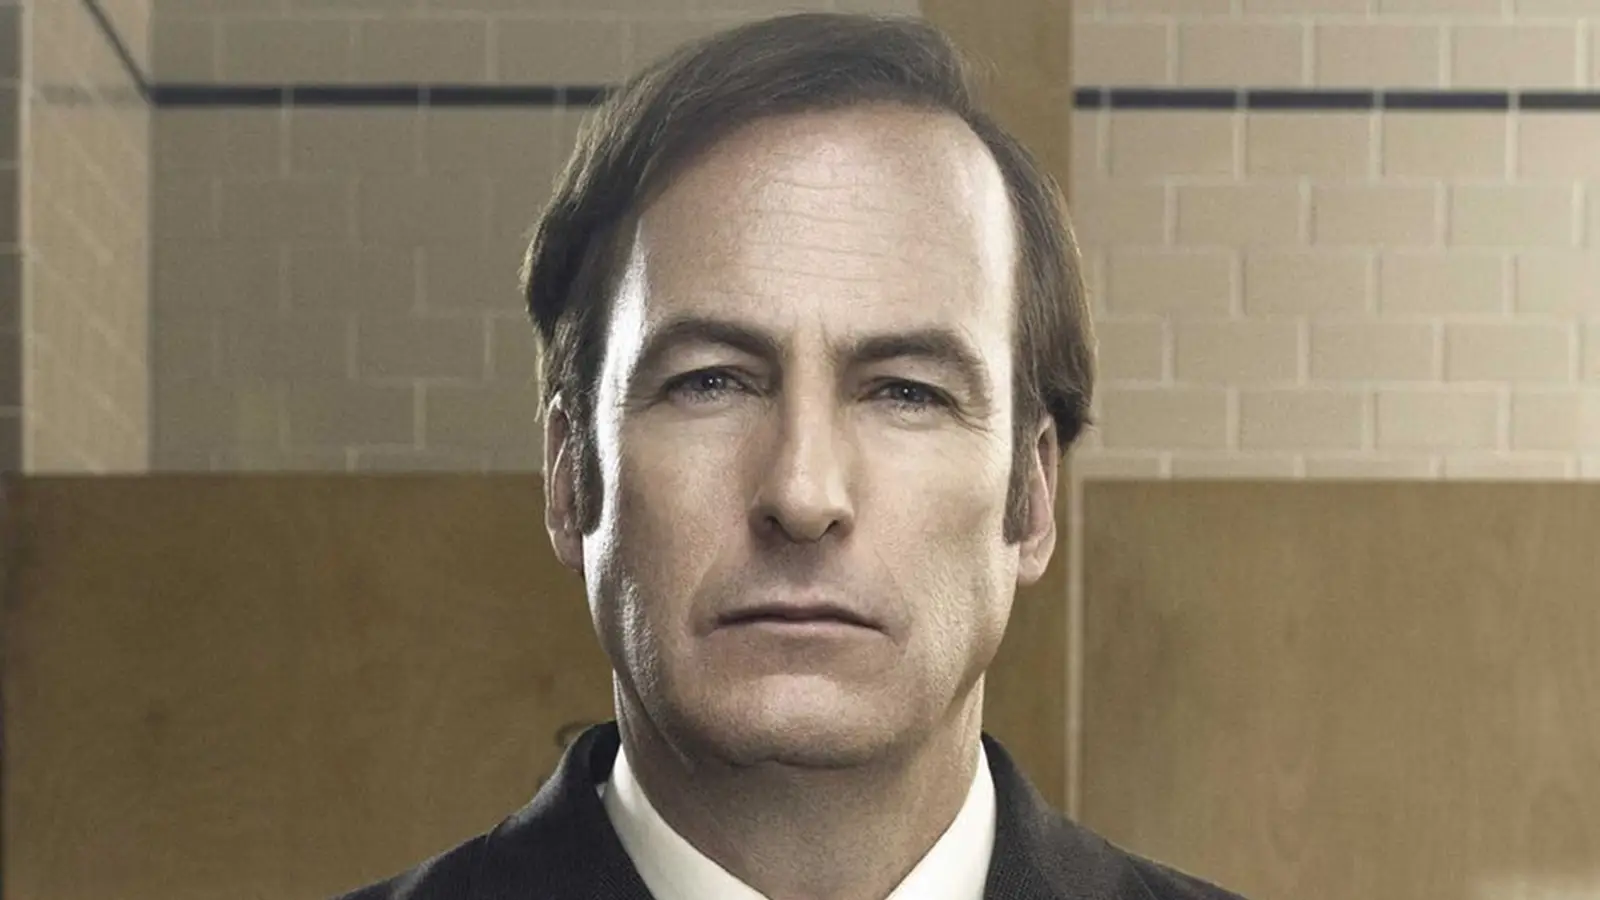 Better Call Saul Season 6 Release Date, Preview, Watch Online, and More